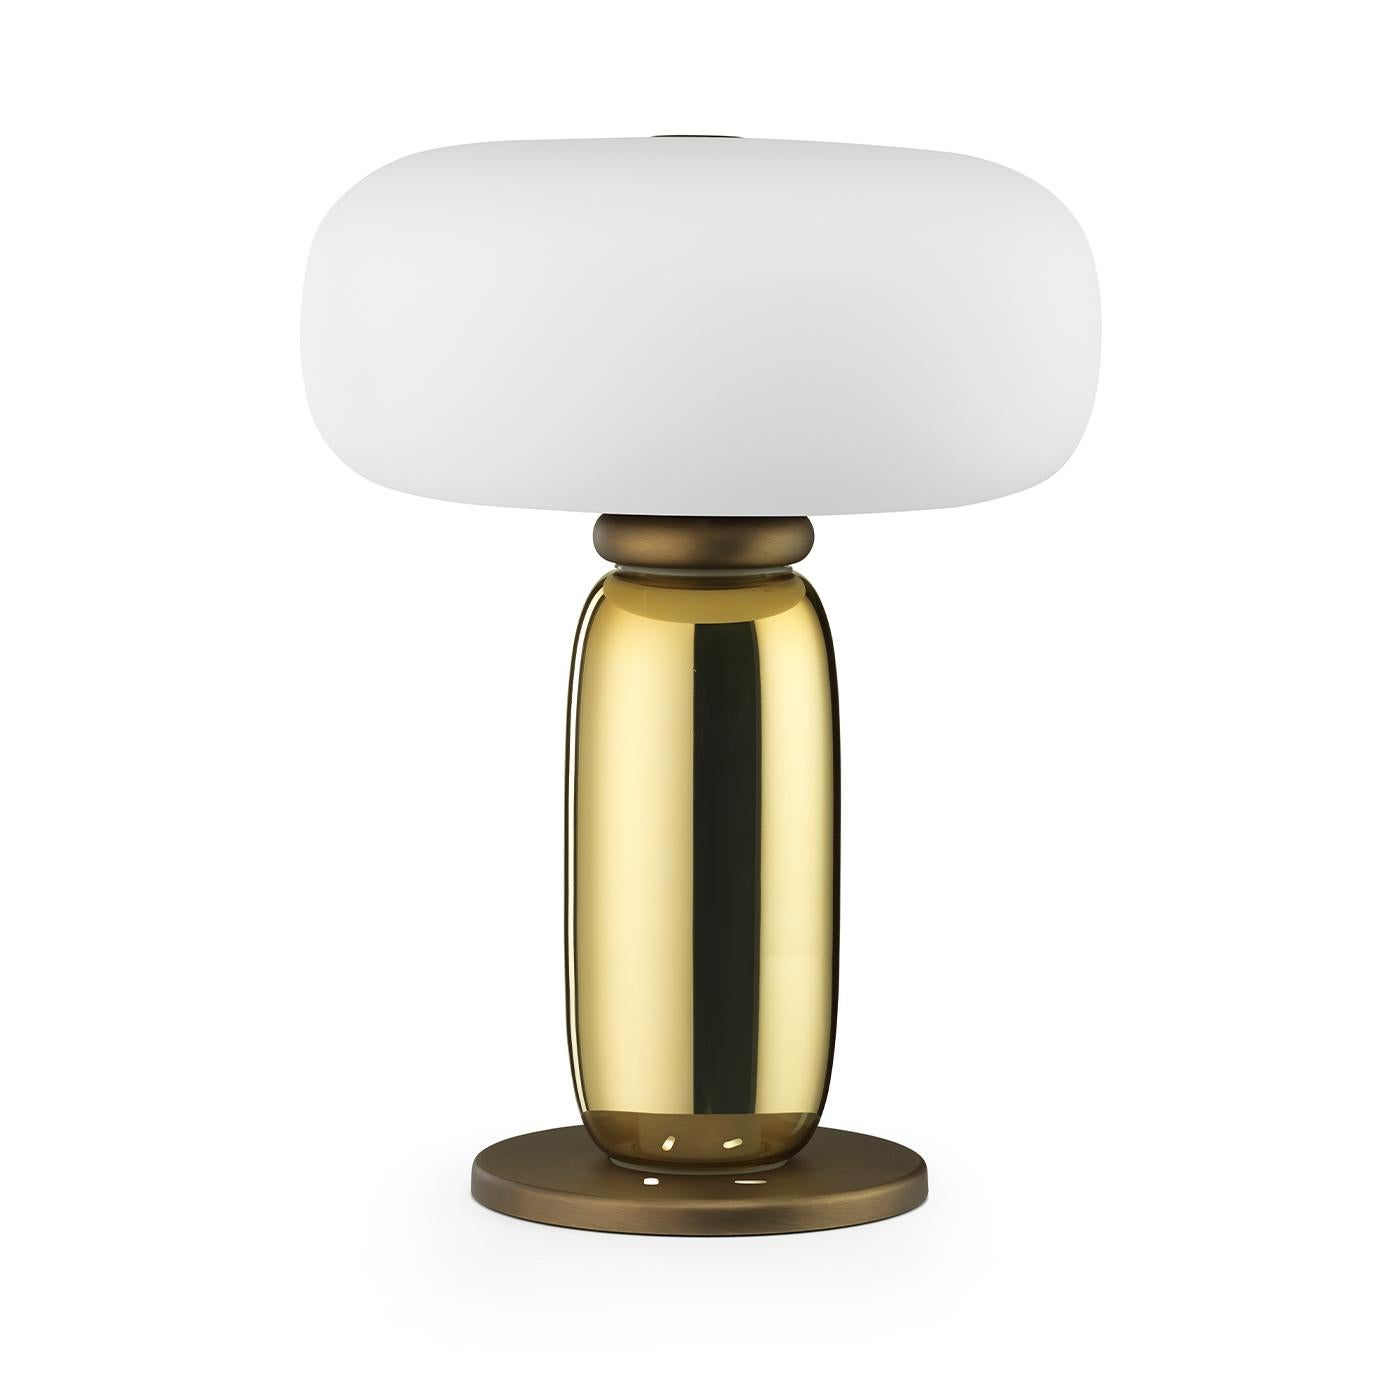 Marked by clean and soft lines, this modern table lamp will effortlessly elevate the style of any room in both modern and traditional decors. Superbly handcrafted, it features a round brass base supporting a glass body finished in a mesmerizing